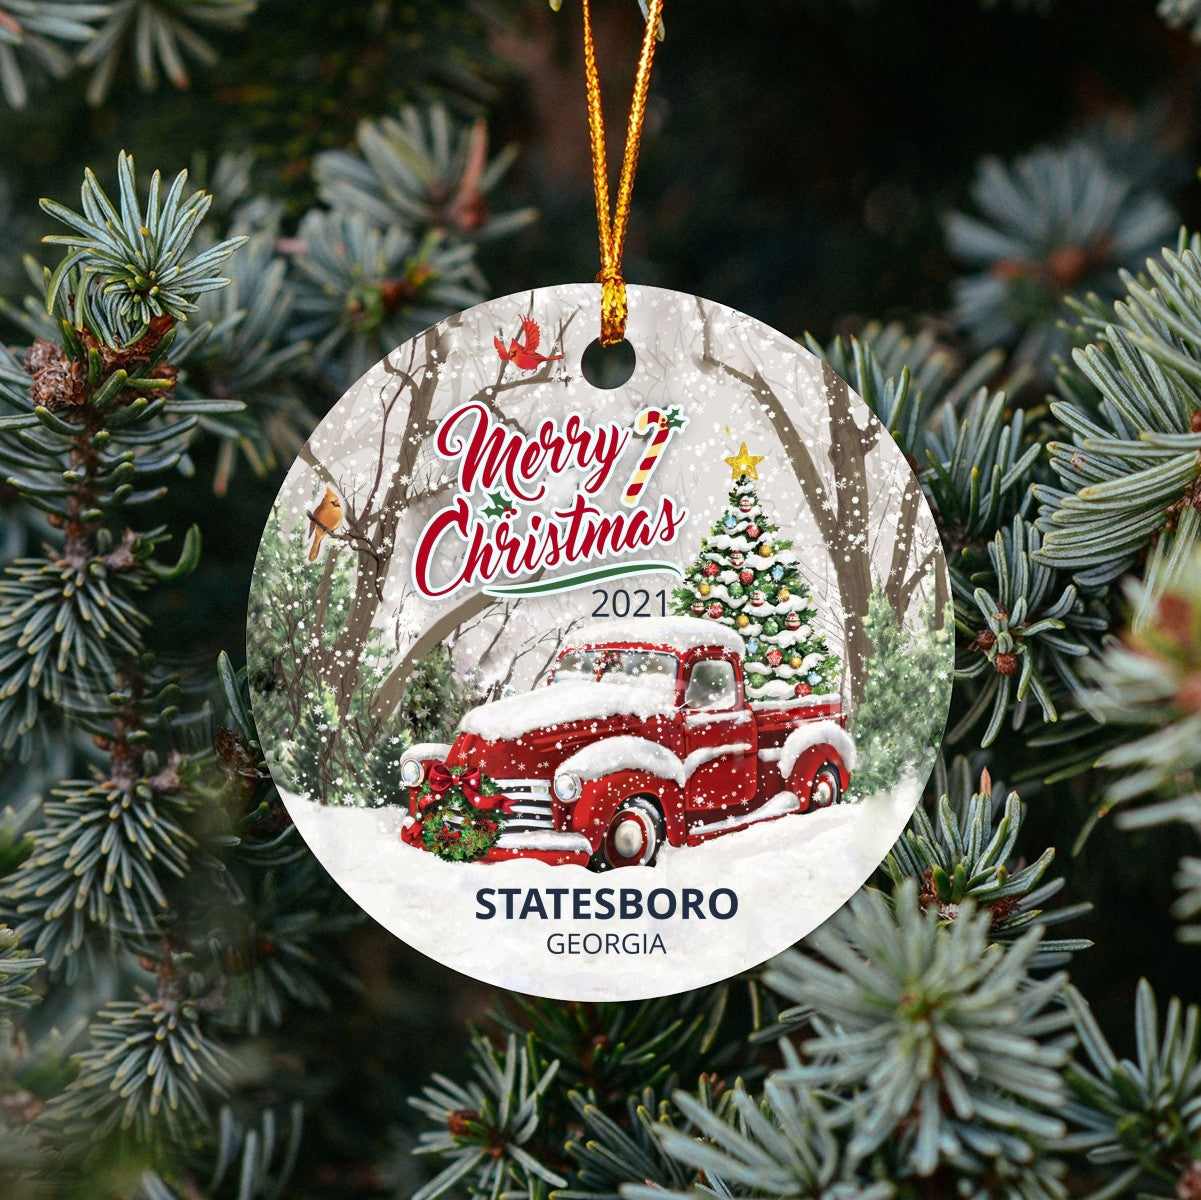 Christmas Tree Ornaments Statesboro - Ornament Customize With Name City And State Statesboro Georgia GA - Red Truck Xmas Ornaments 3'' Plastic Gift For Family, Friend And Housewarming